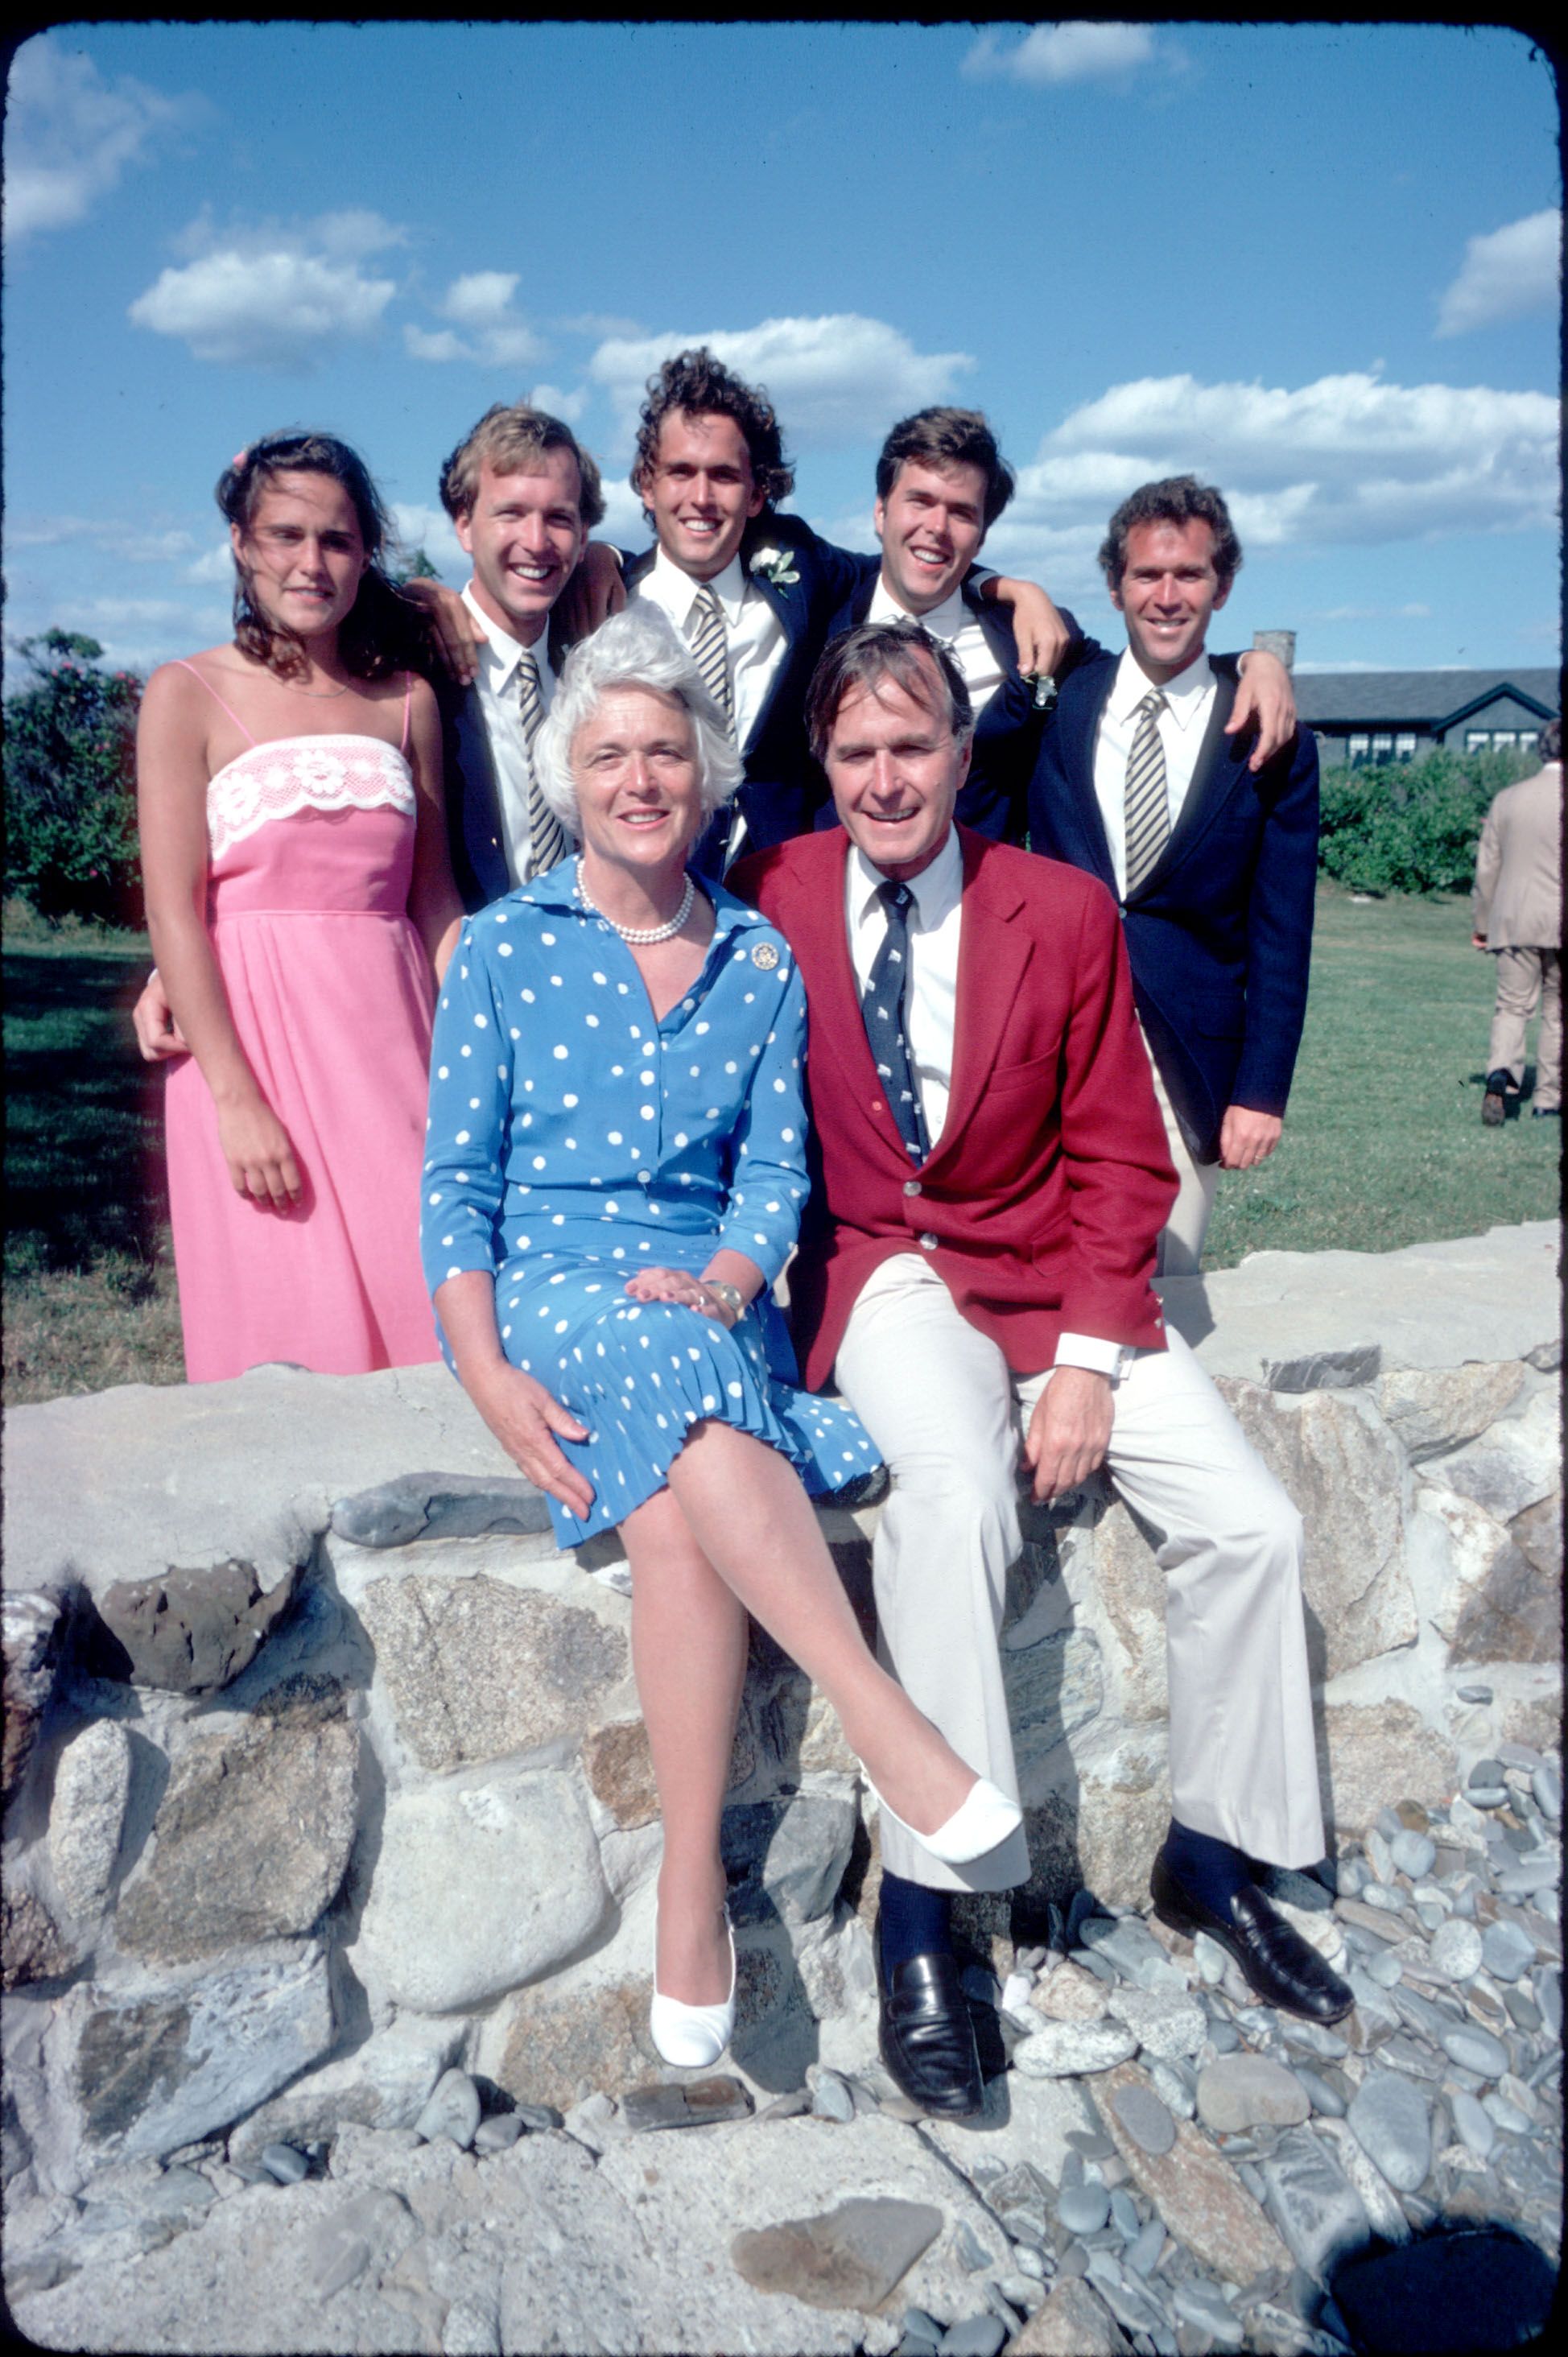 George and Barbara Bush pose with their children Dorothy, Neil, Marvin, Jeb, and George on July 1, 1980, in Kennebunkport, Maine. | Source: Dirck Halstead/Liaison/Getty Images